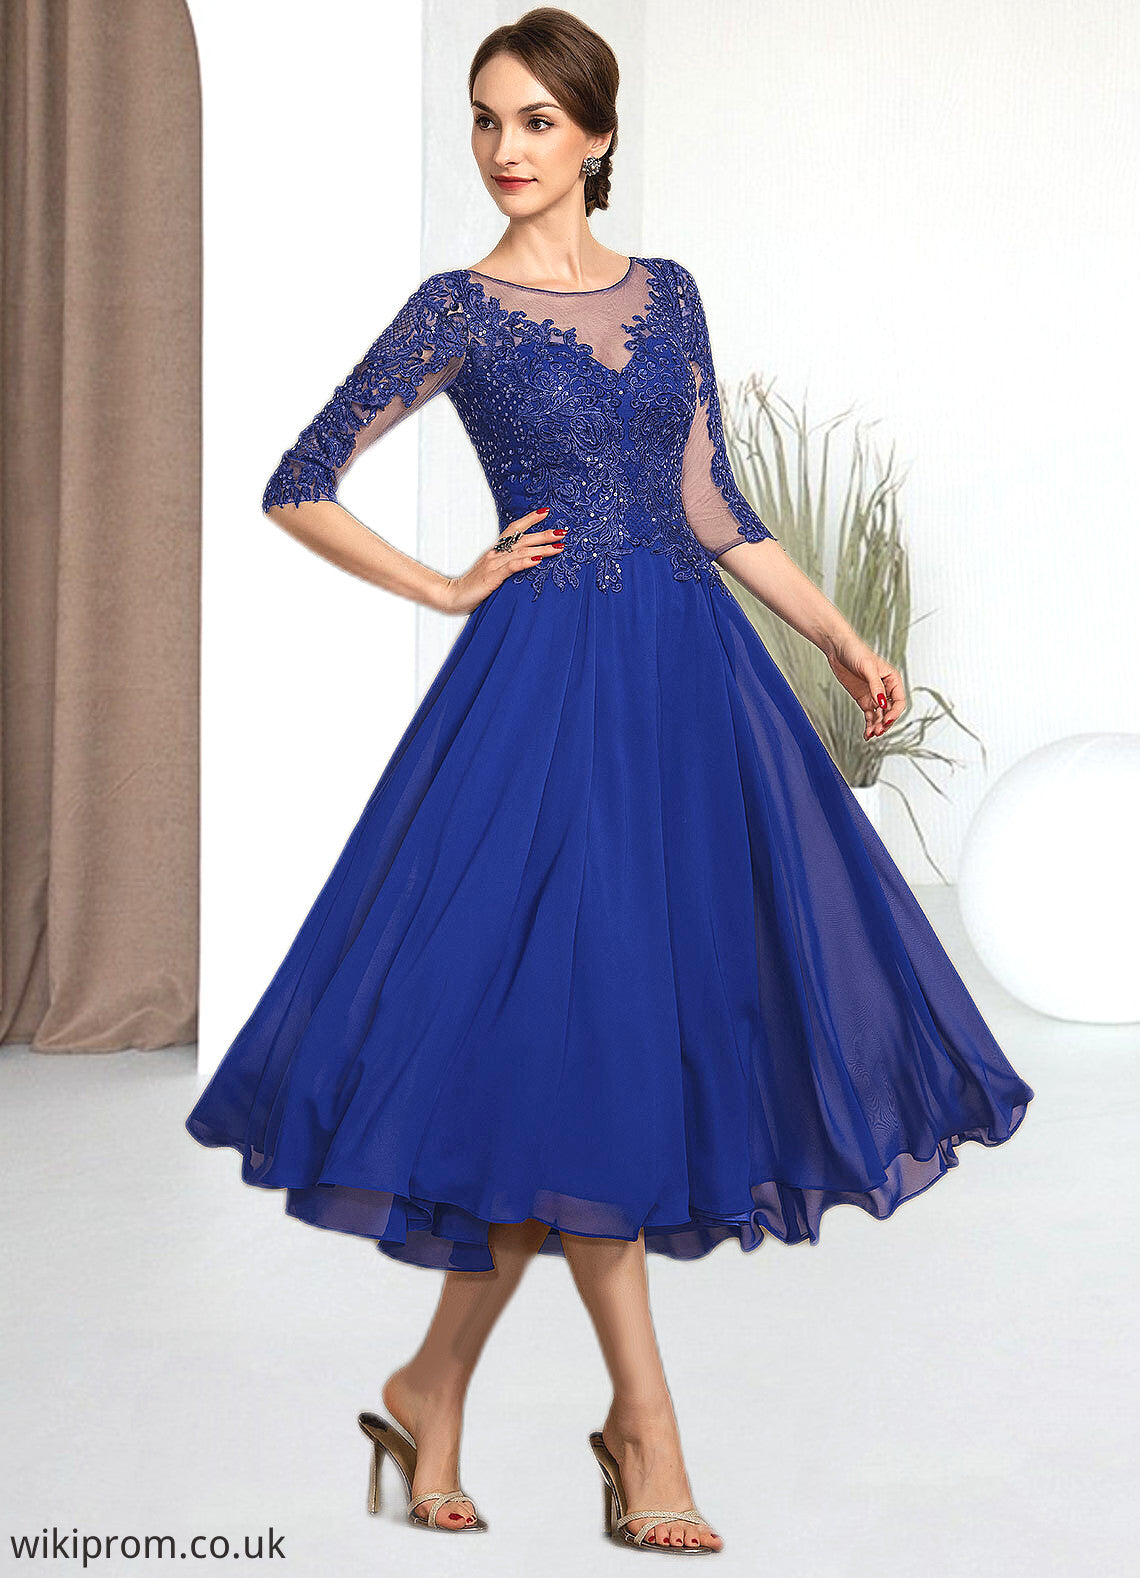 Claire A-Line Scoop Neck Tea-Length Chiffon Lace Mother of the Bride Dress With Sequins SWK126P0014565